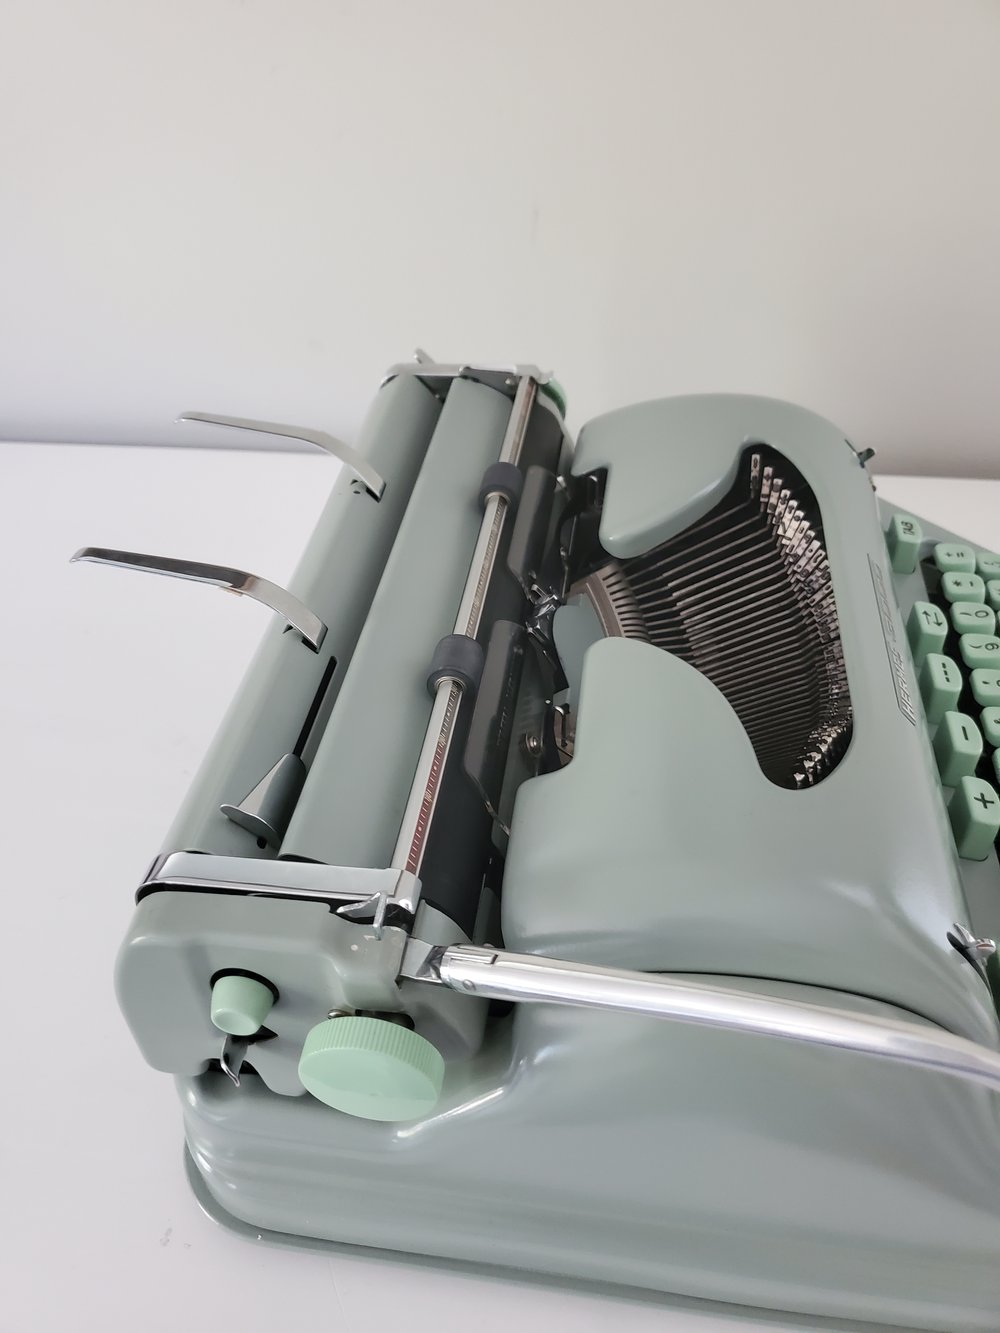 Hermes 3000 vintage typewriter with case and manual, serviced, ready to  write — Classic Typewriter Co.